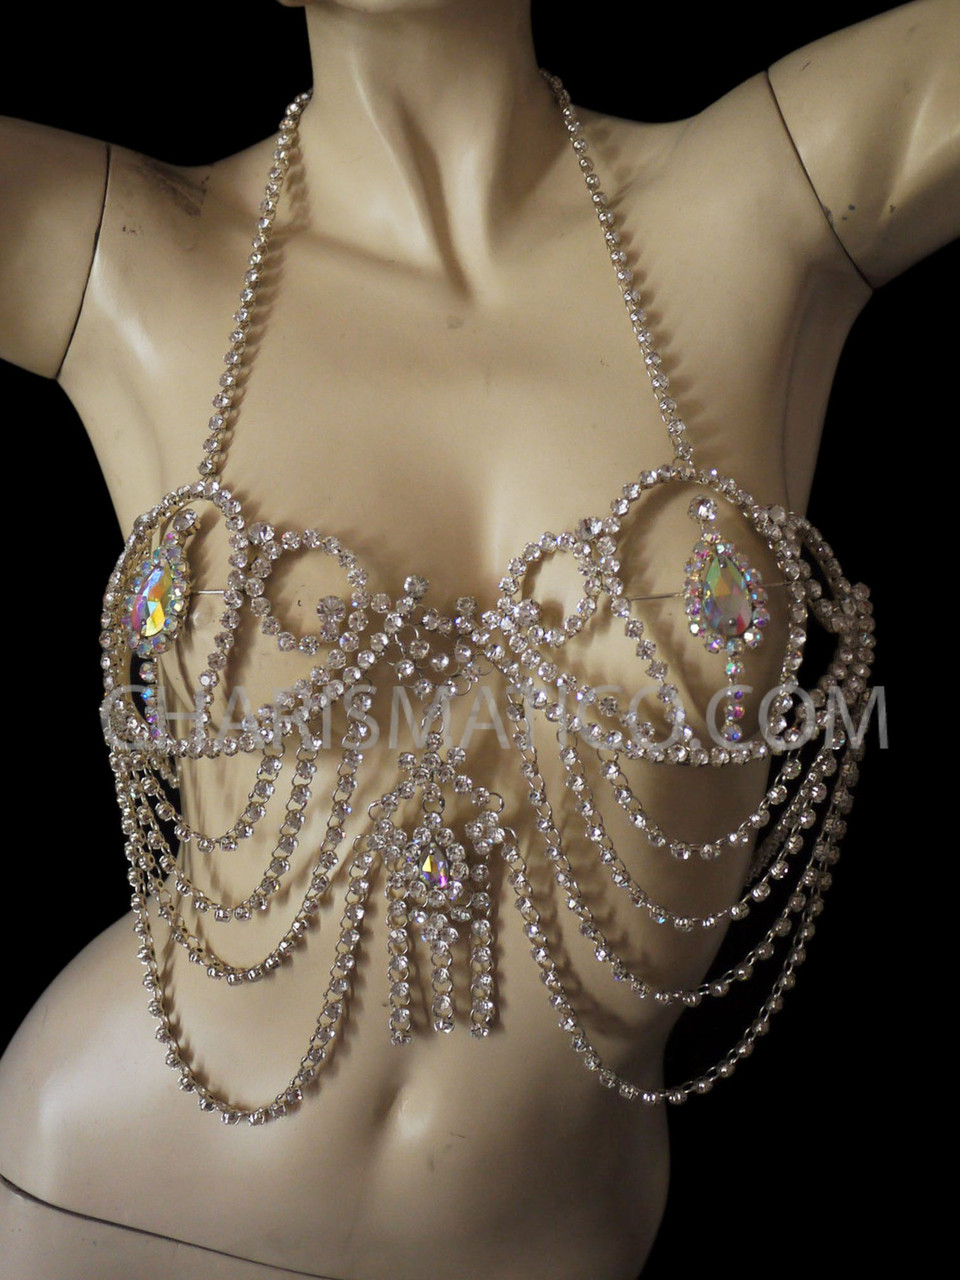 Vintage Brass Belly Chain Body Drape Burlesque Showgirl Exotic